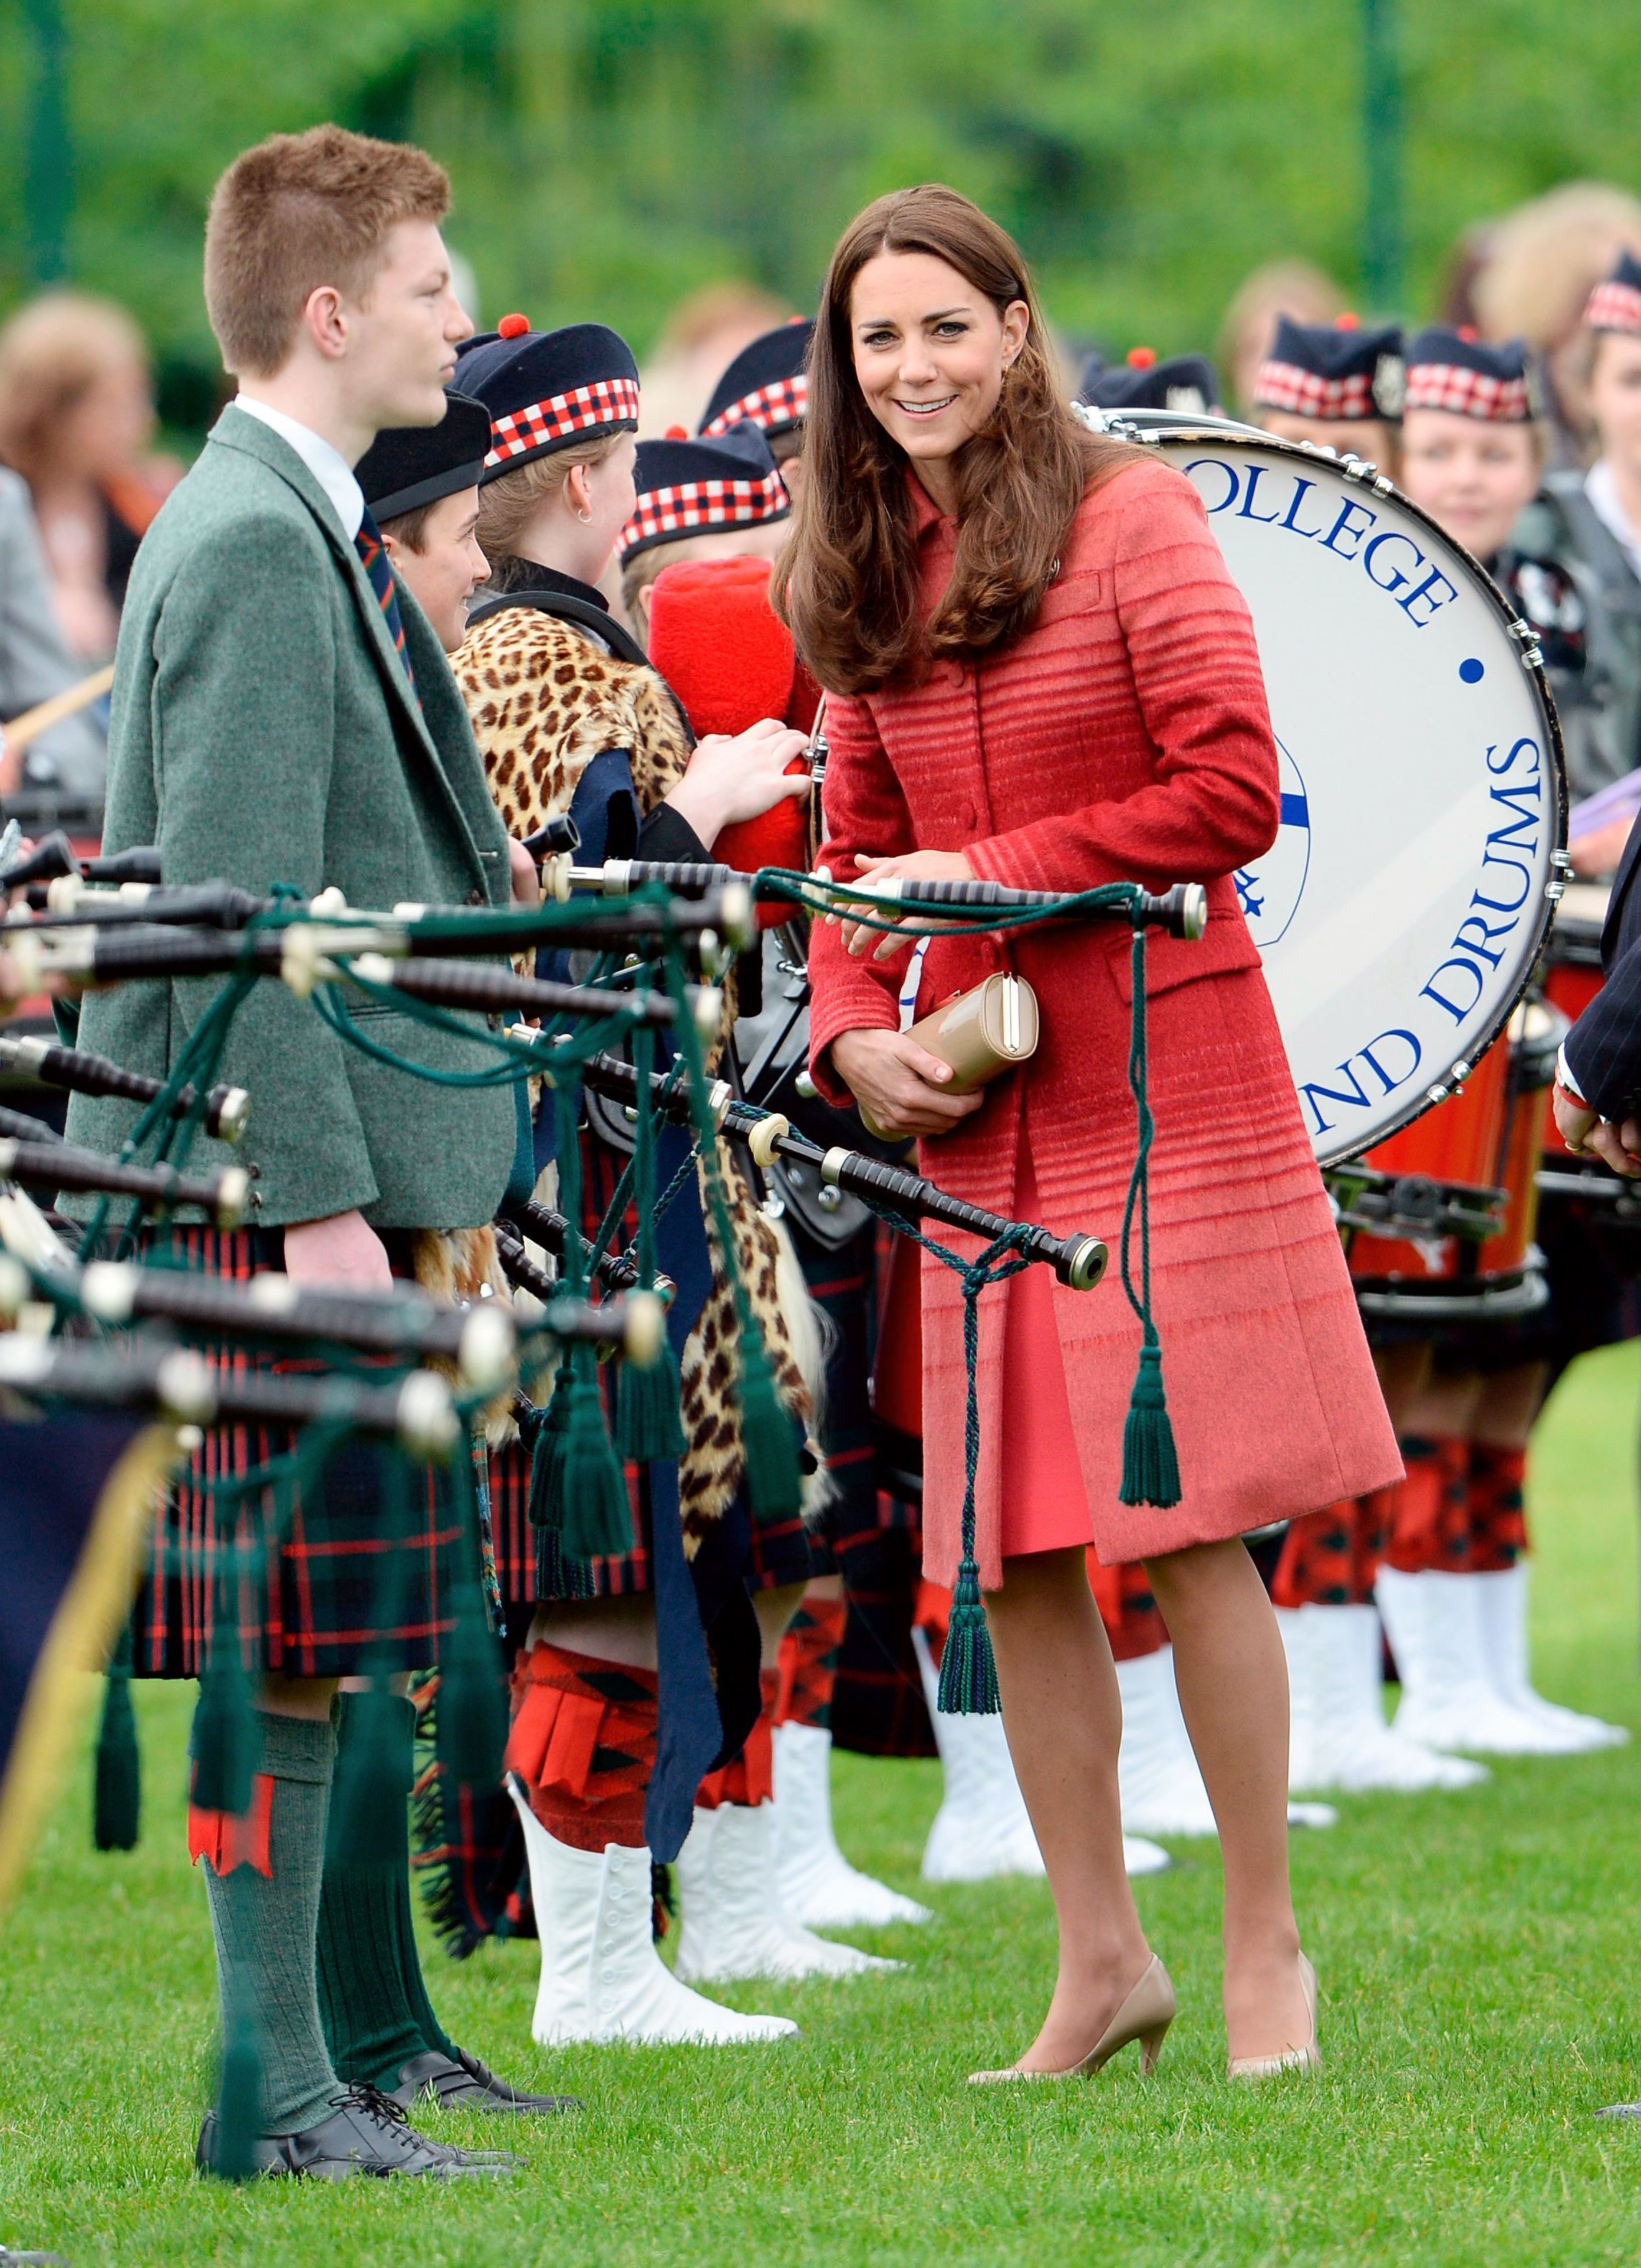 <p><a href="https://www.wonderwall.com/celebrity/profiles/overview/duchess-kate-1356.article">Duchess Kate</a> visited with bagpipe players and band members at the Strathearn Community Campus in Crieff, Scotland, on May 29, 2014.</p>